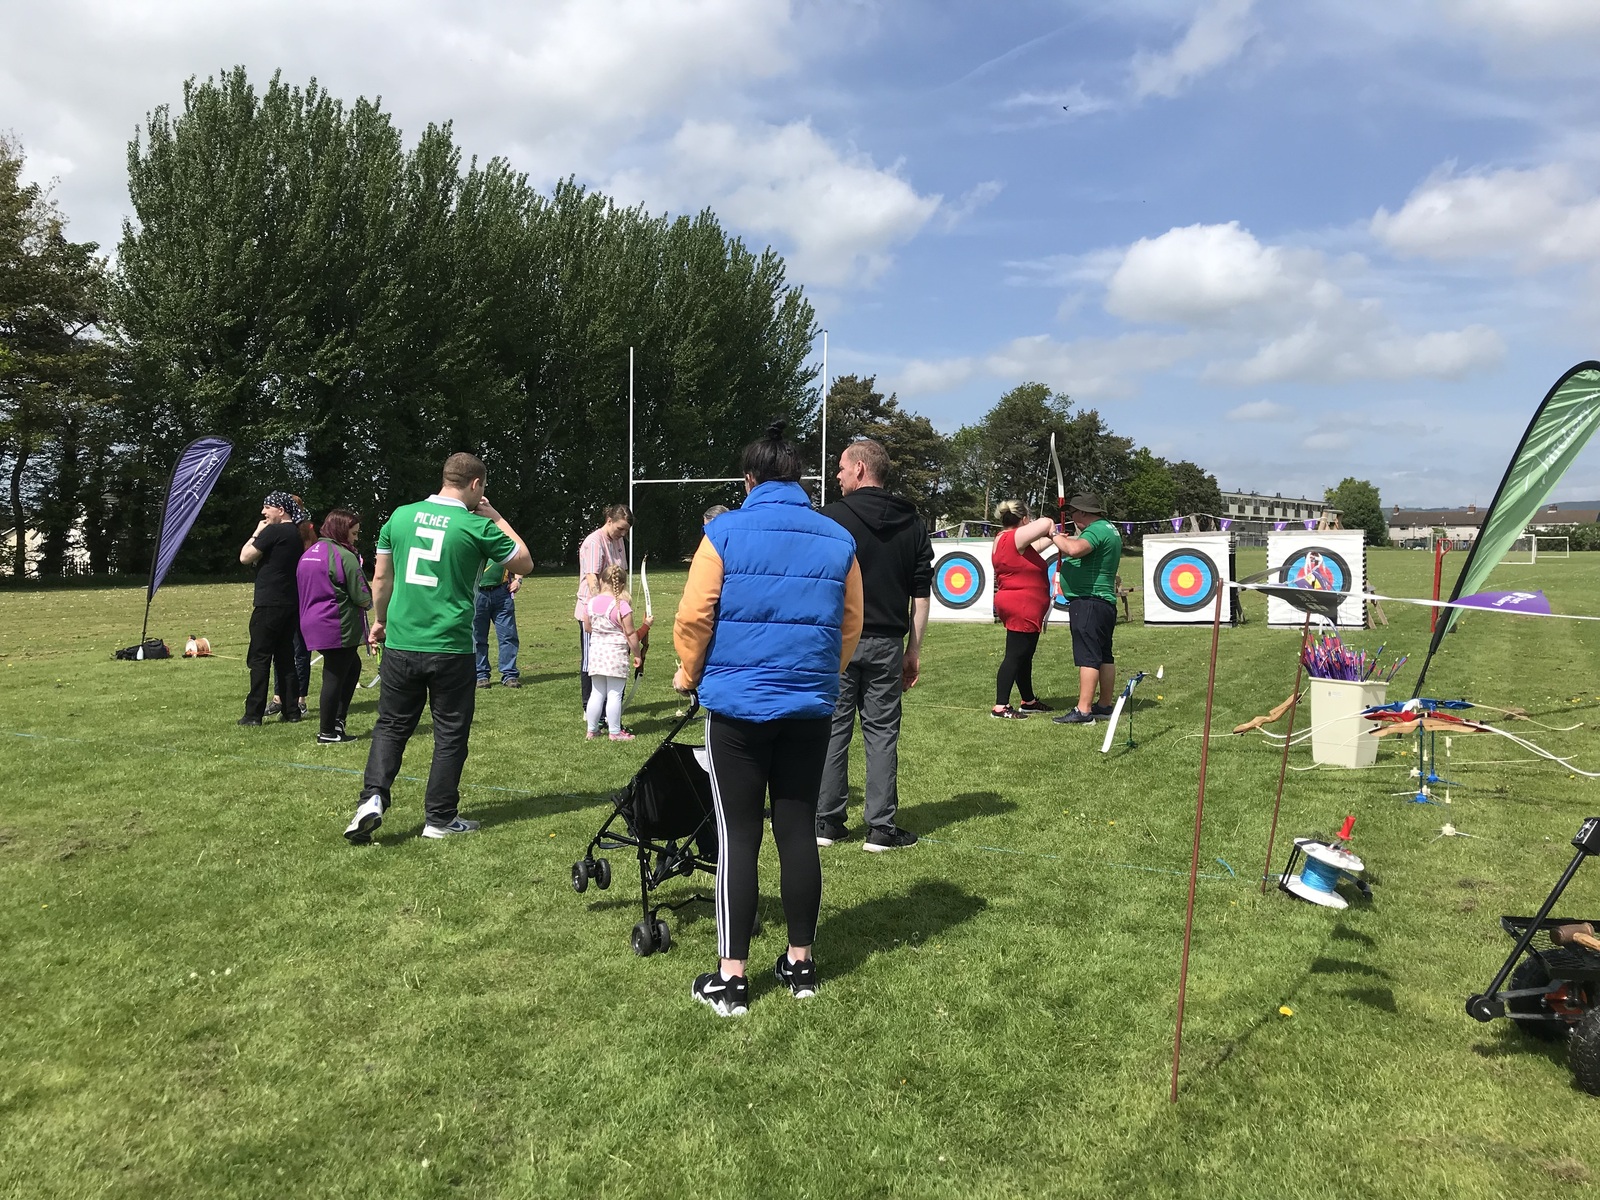 Open day at an archery club